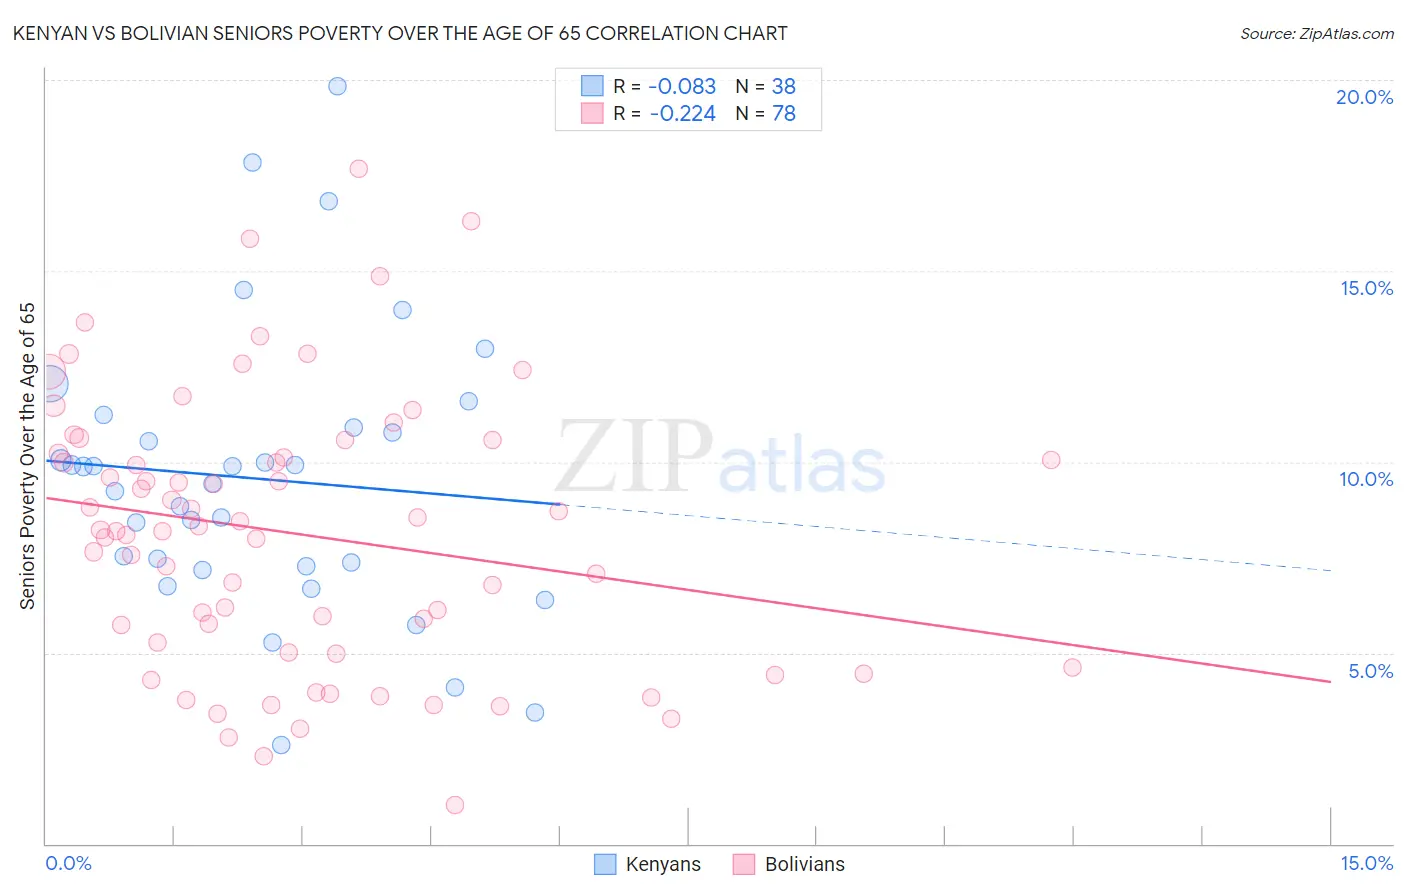 Kenyan vs Bolivian Seniors Poverty Over the Age of 65